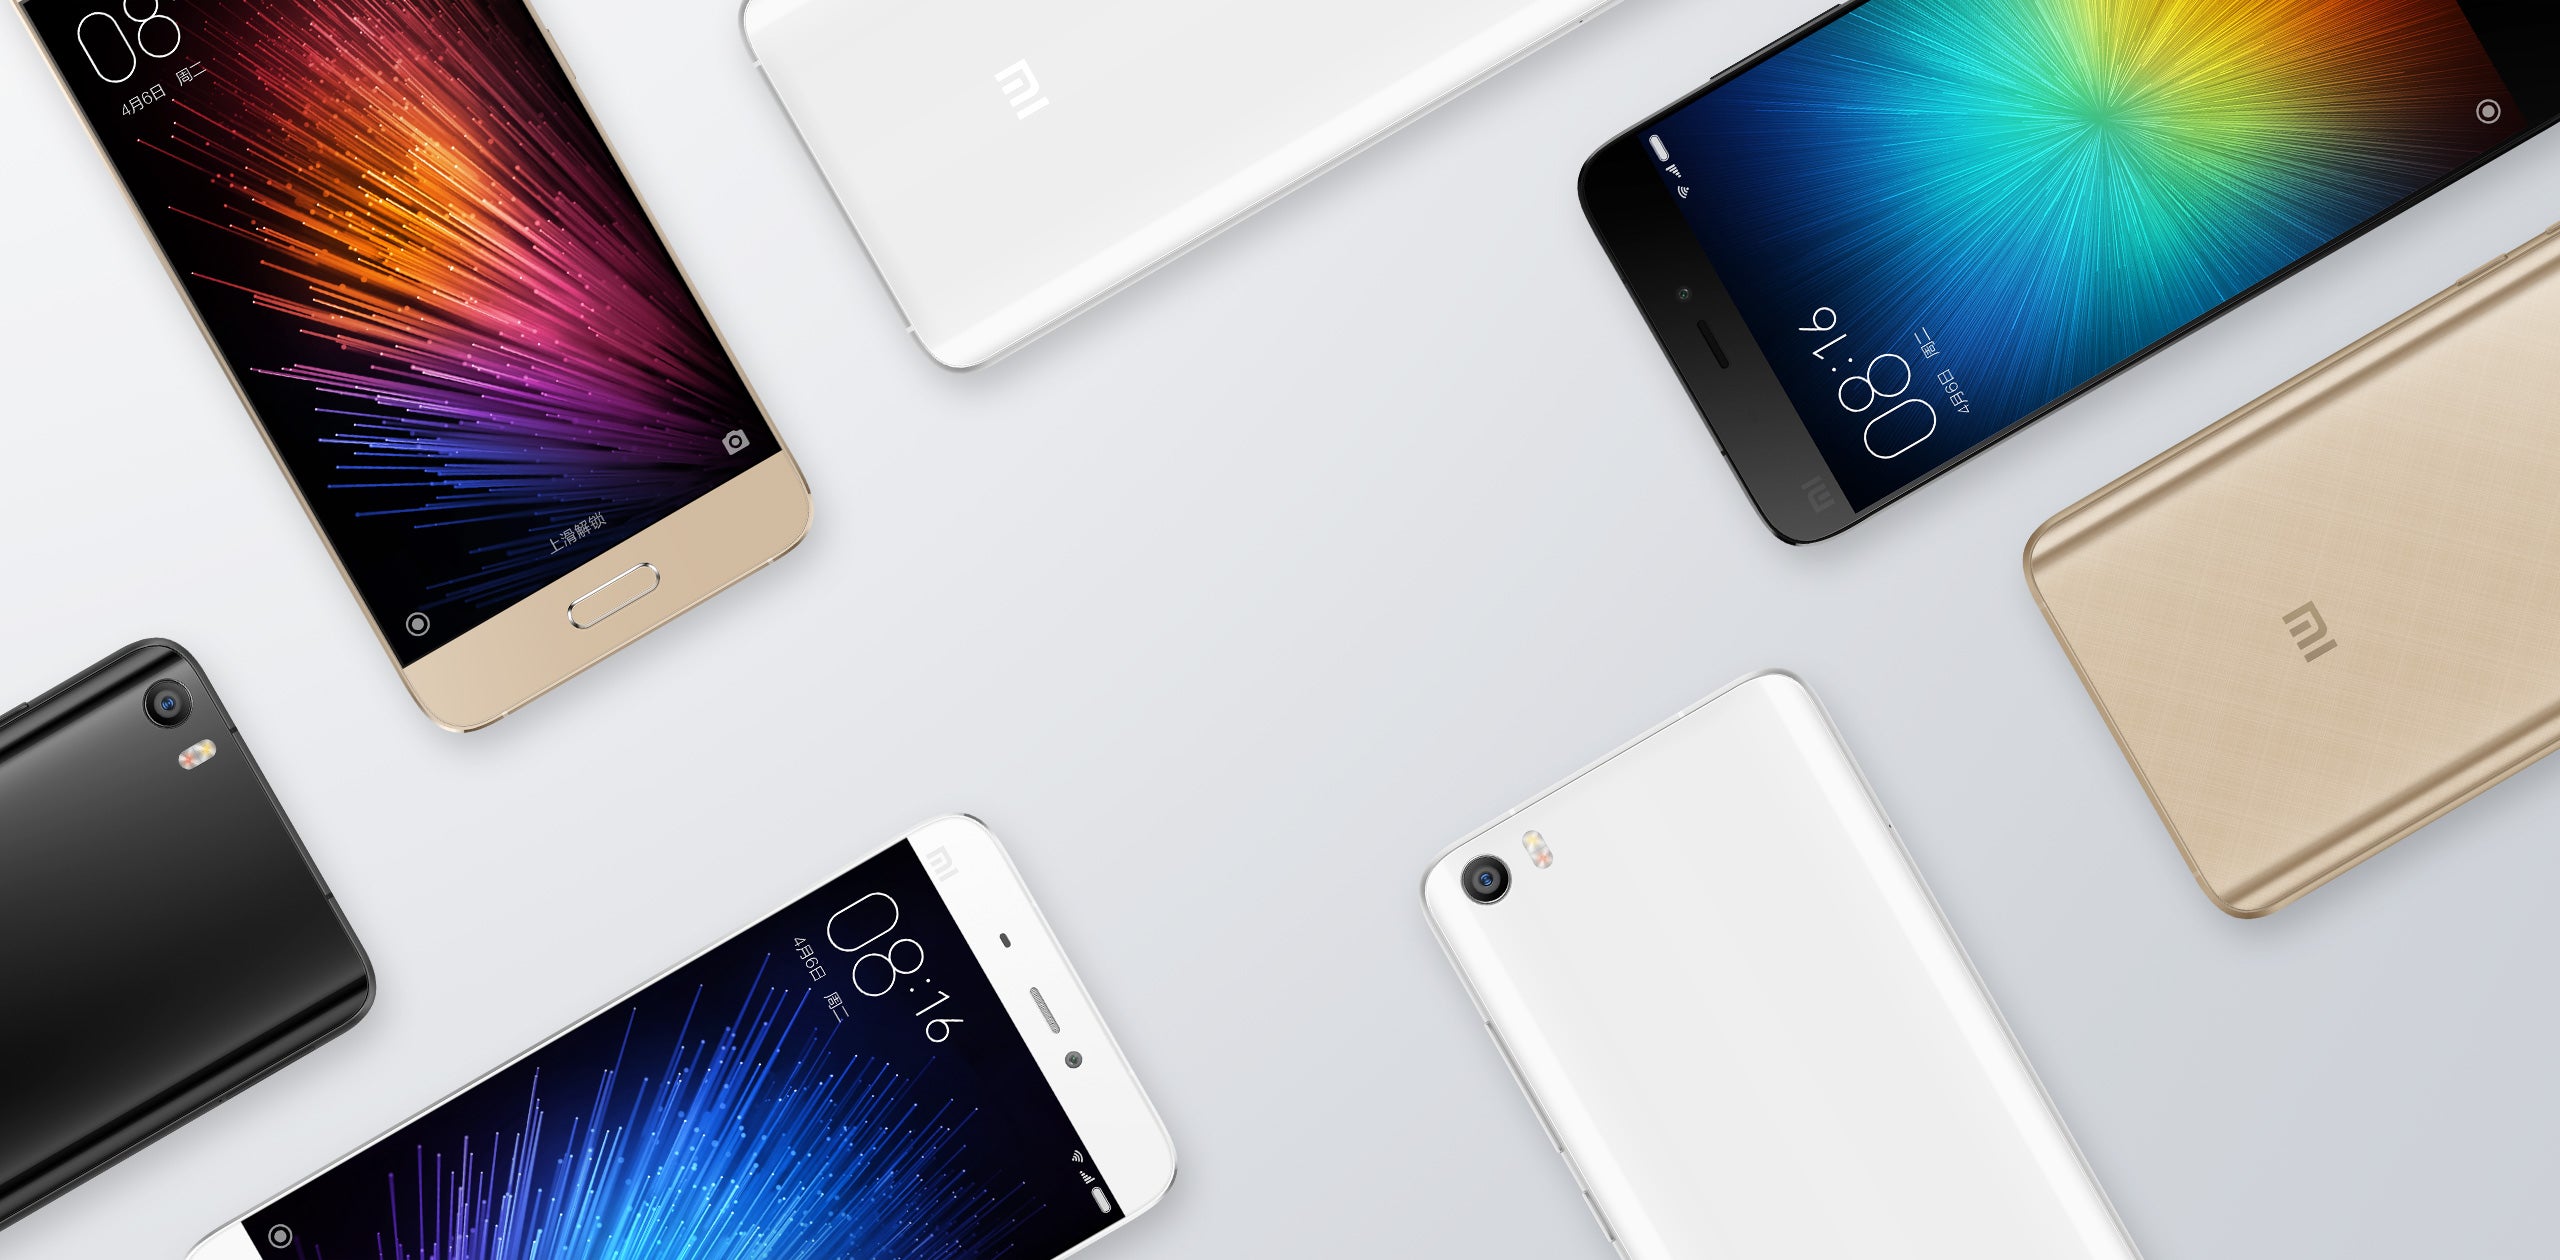 Xiaomi unable to meet demand for the Mi 5, asks Foxconn to increase production